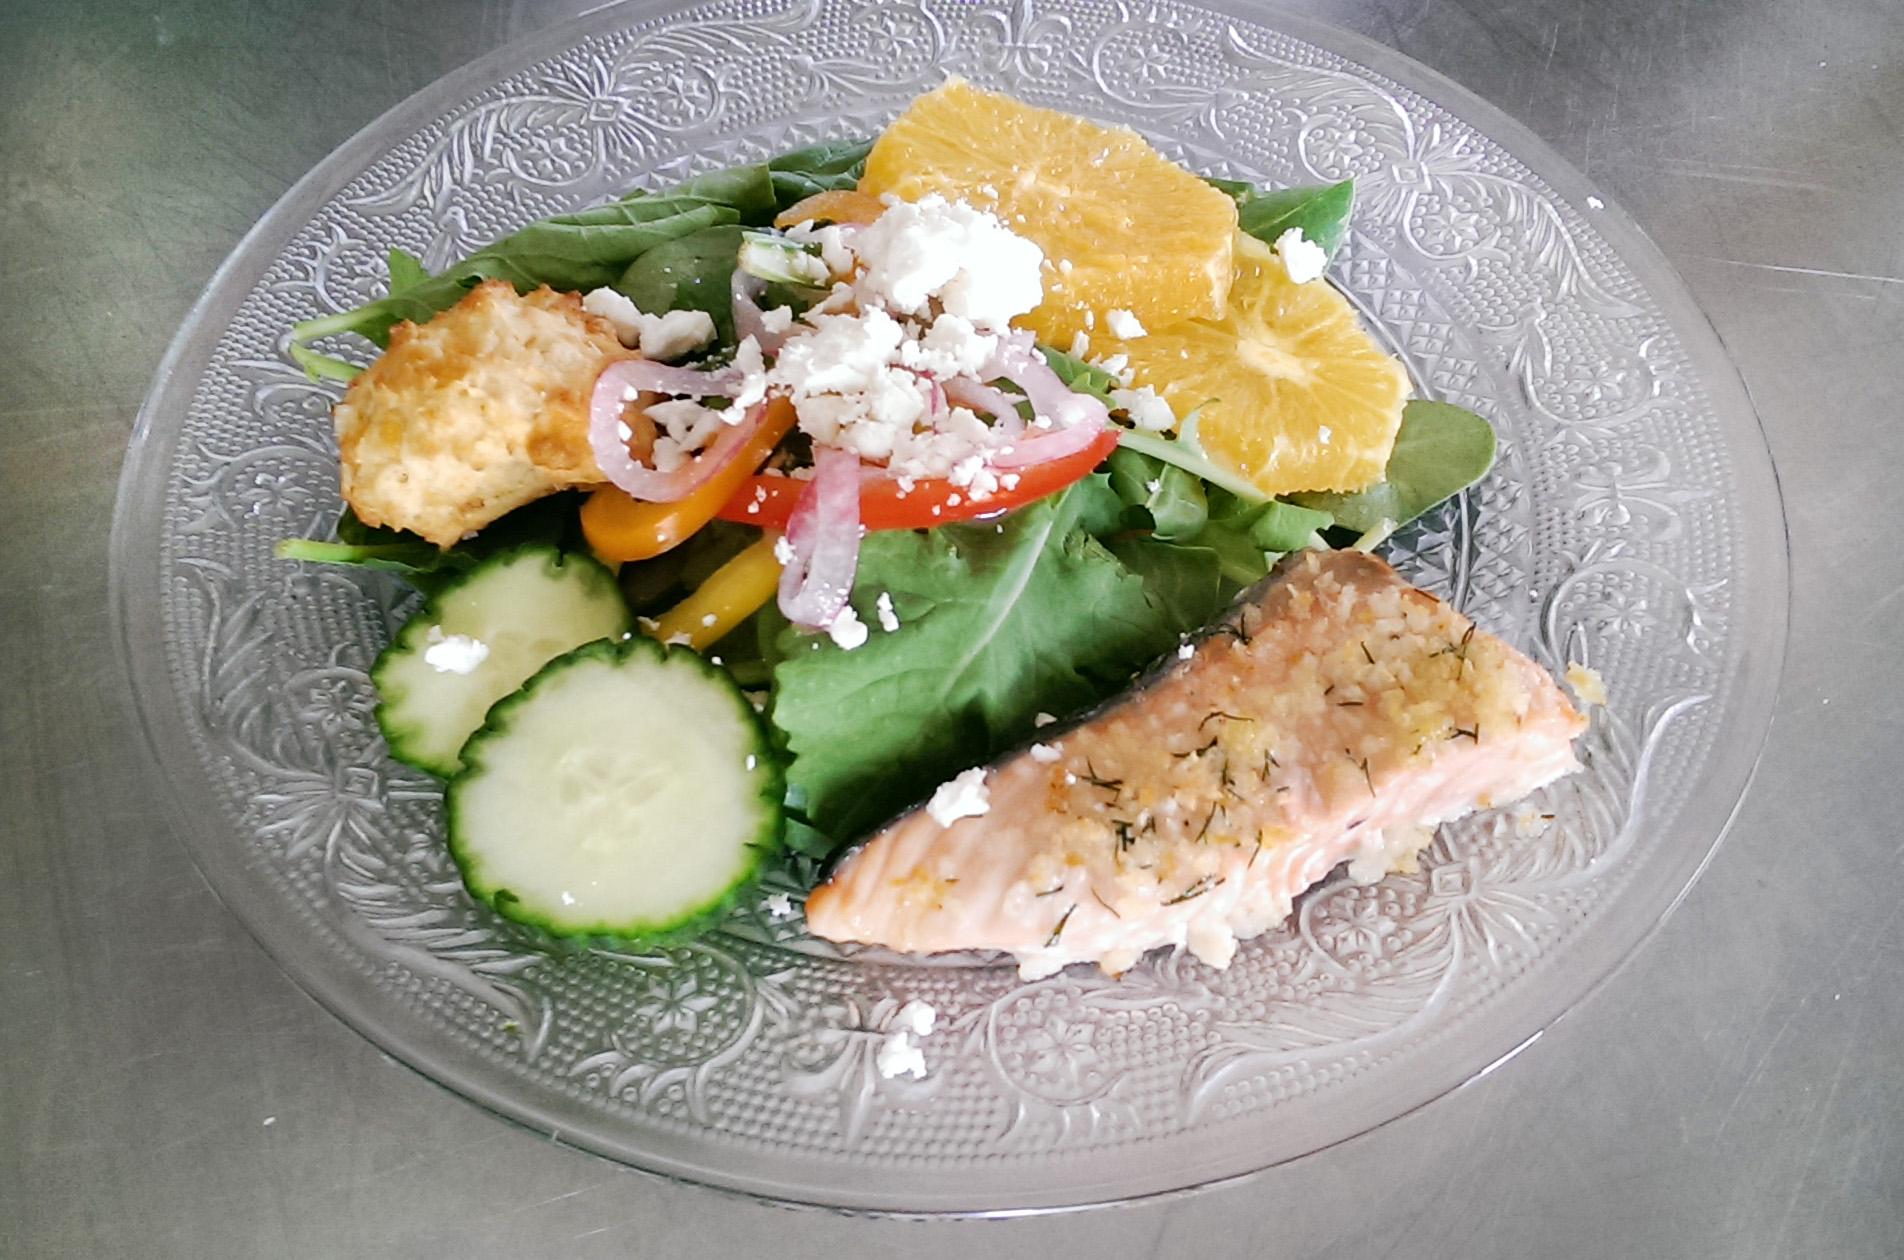  Citrus Salad with Crusted Baked&nbsp;Salmon and Cheddar Biscuit 